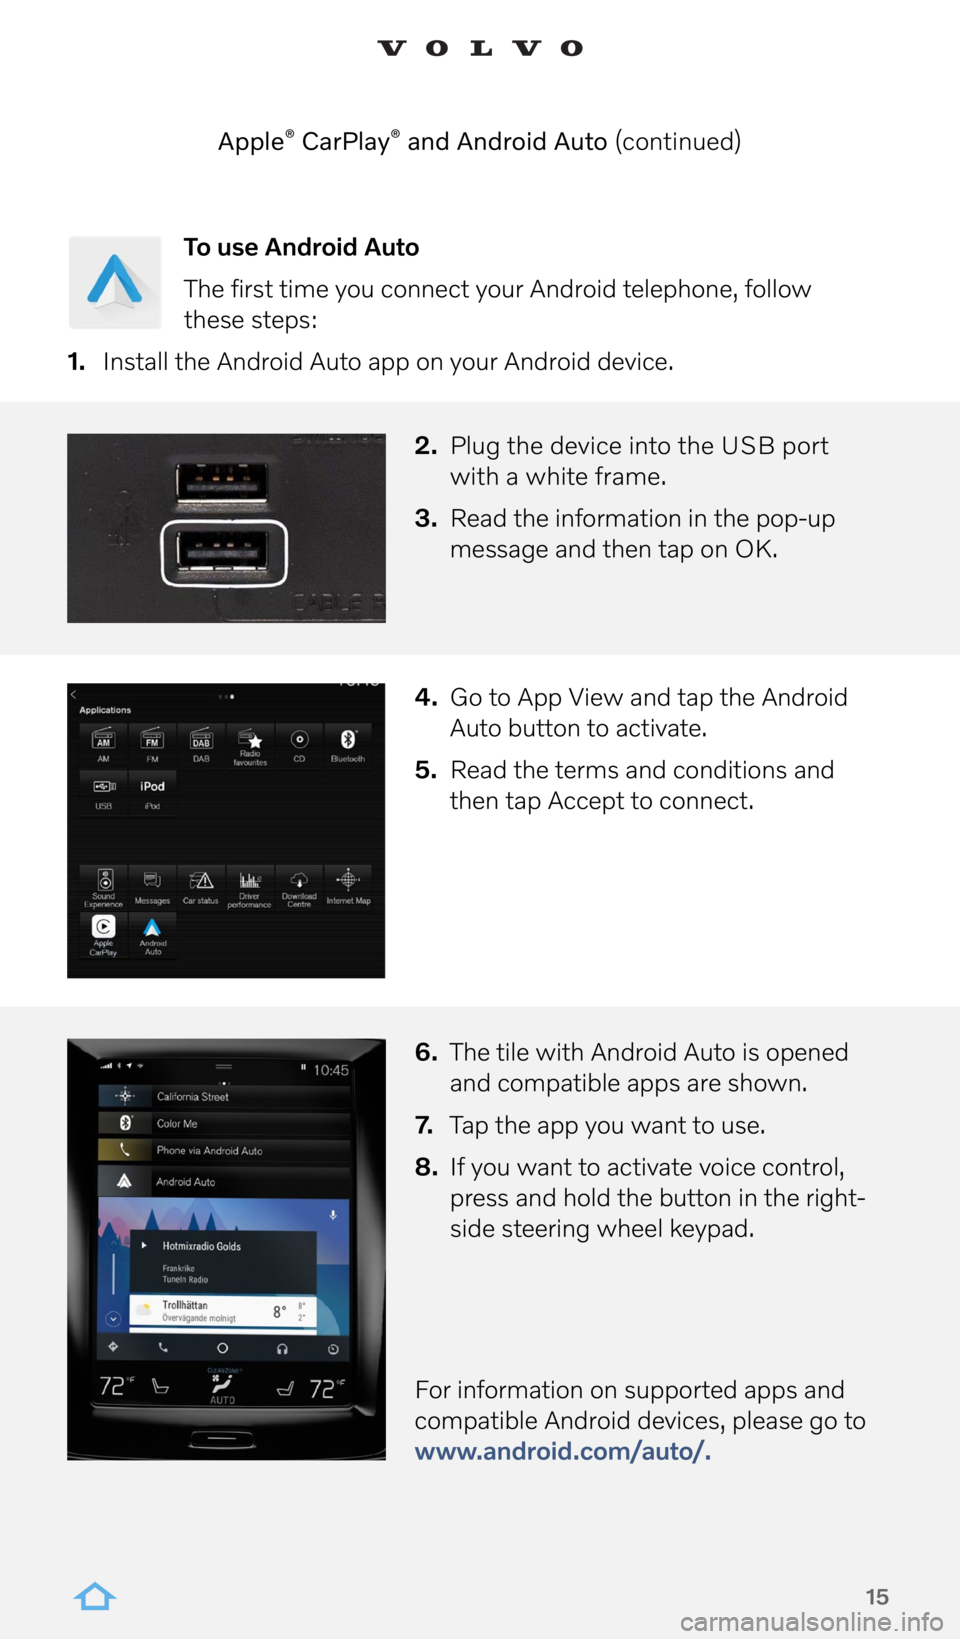 VOLVO XC90 2022  Sensus Digital Guide 15
To use Android Auto
The first time you connect your Android telephone, follow   
these steps:
1.  Install the Android Auto app on your Android device. 
2. Plug the device into the USB port  
with a